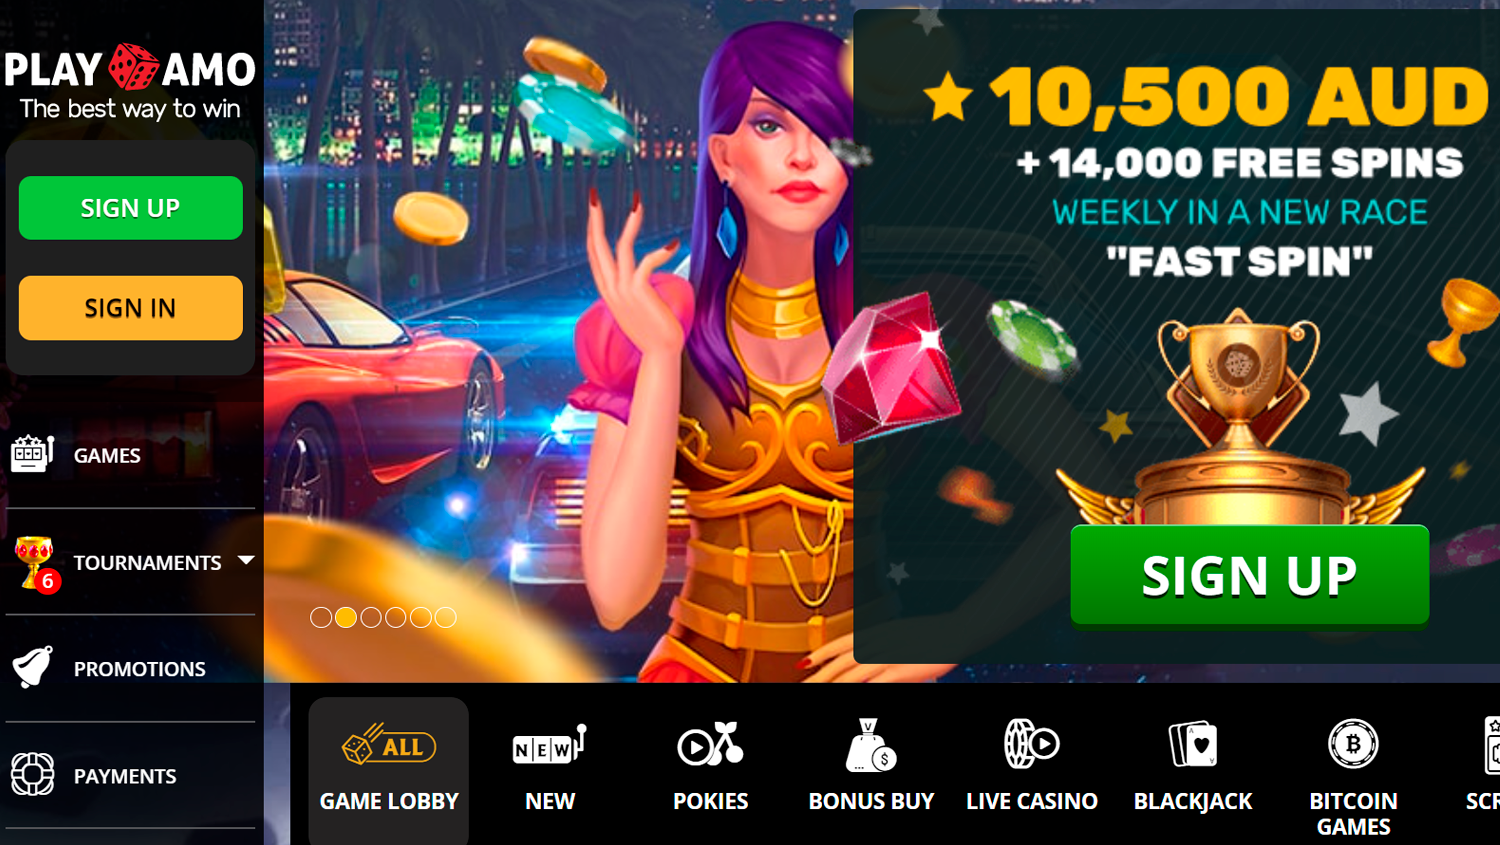 Screenshot of home page on the Playamo casino site